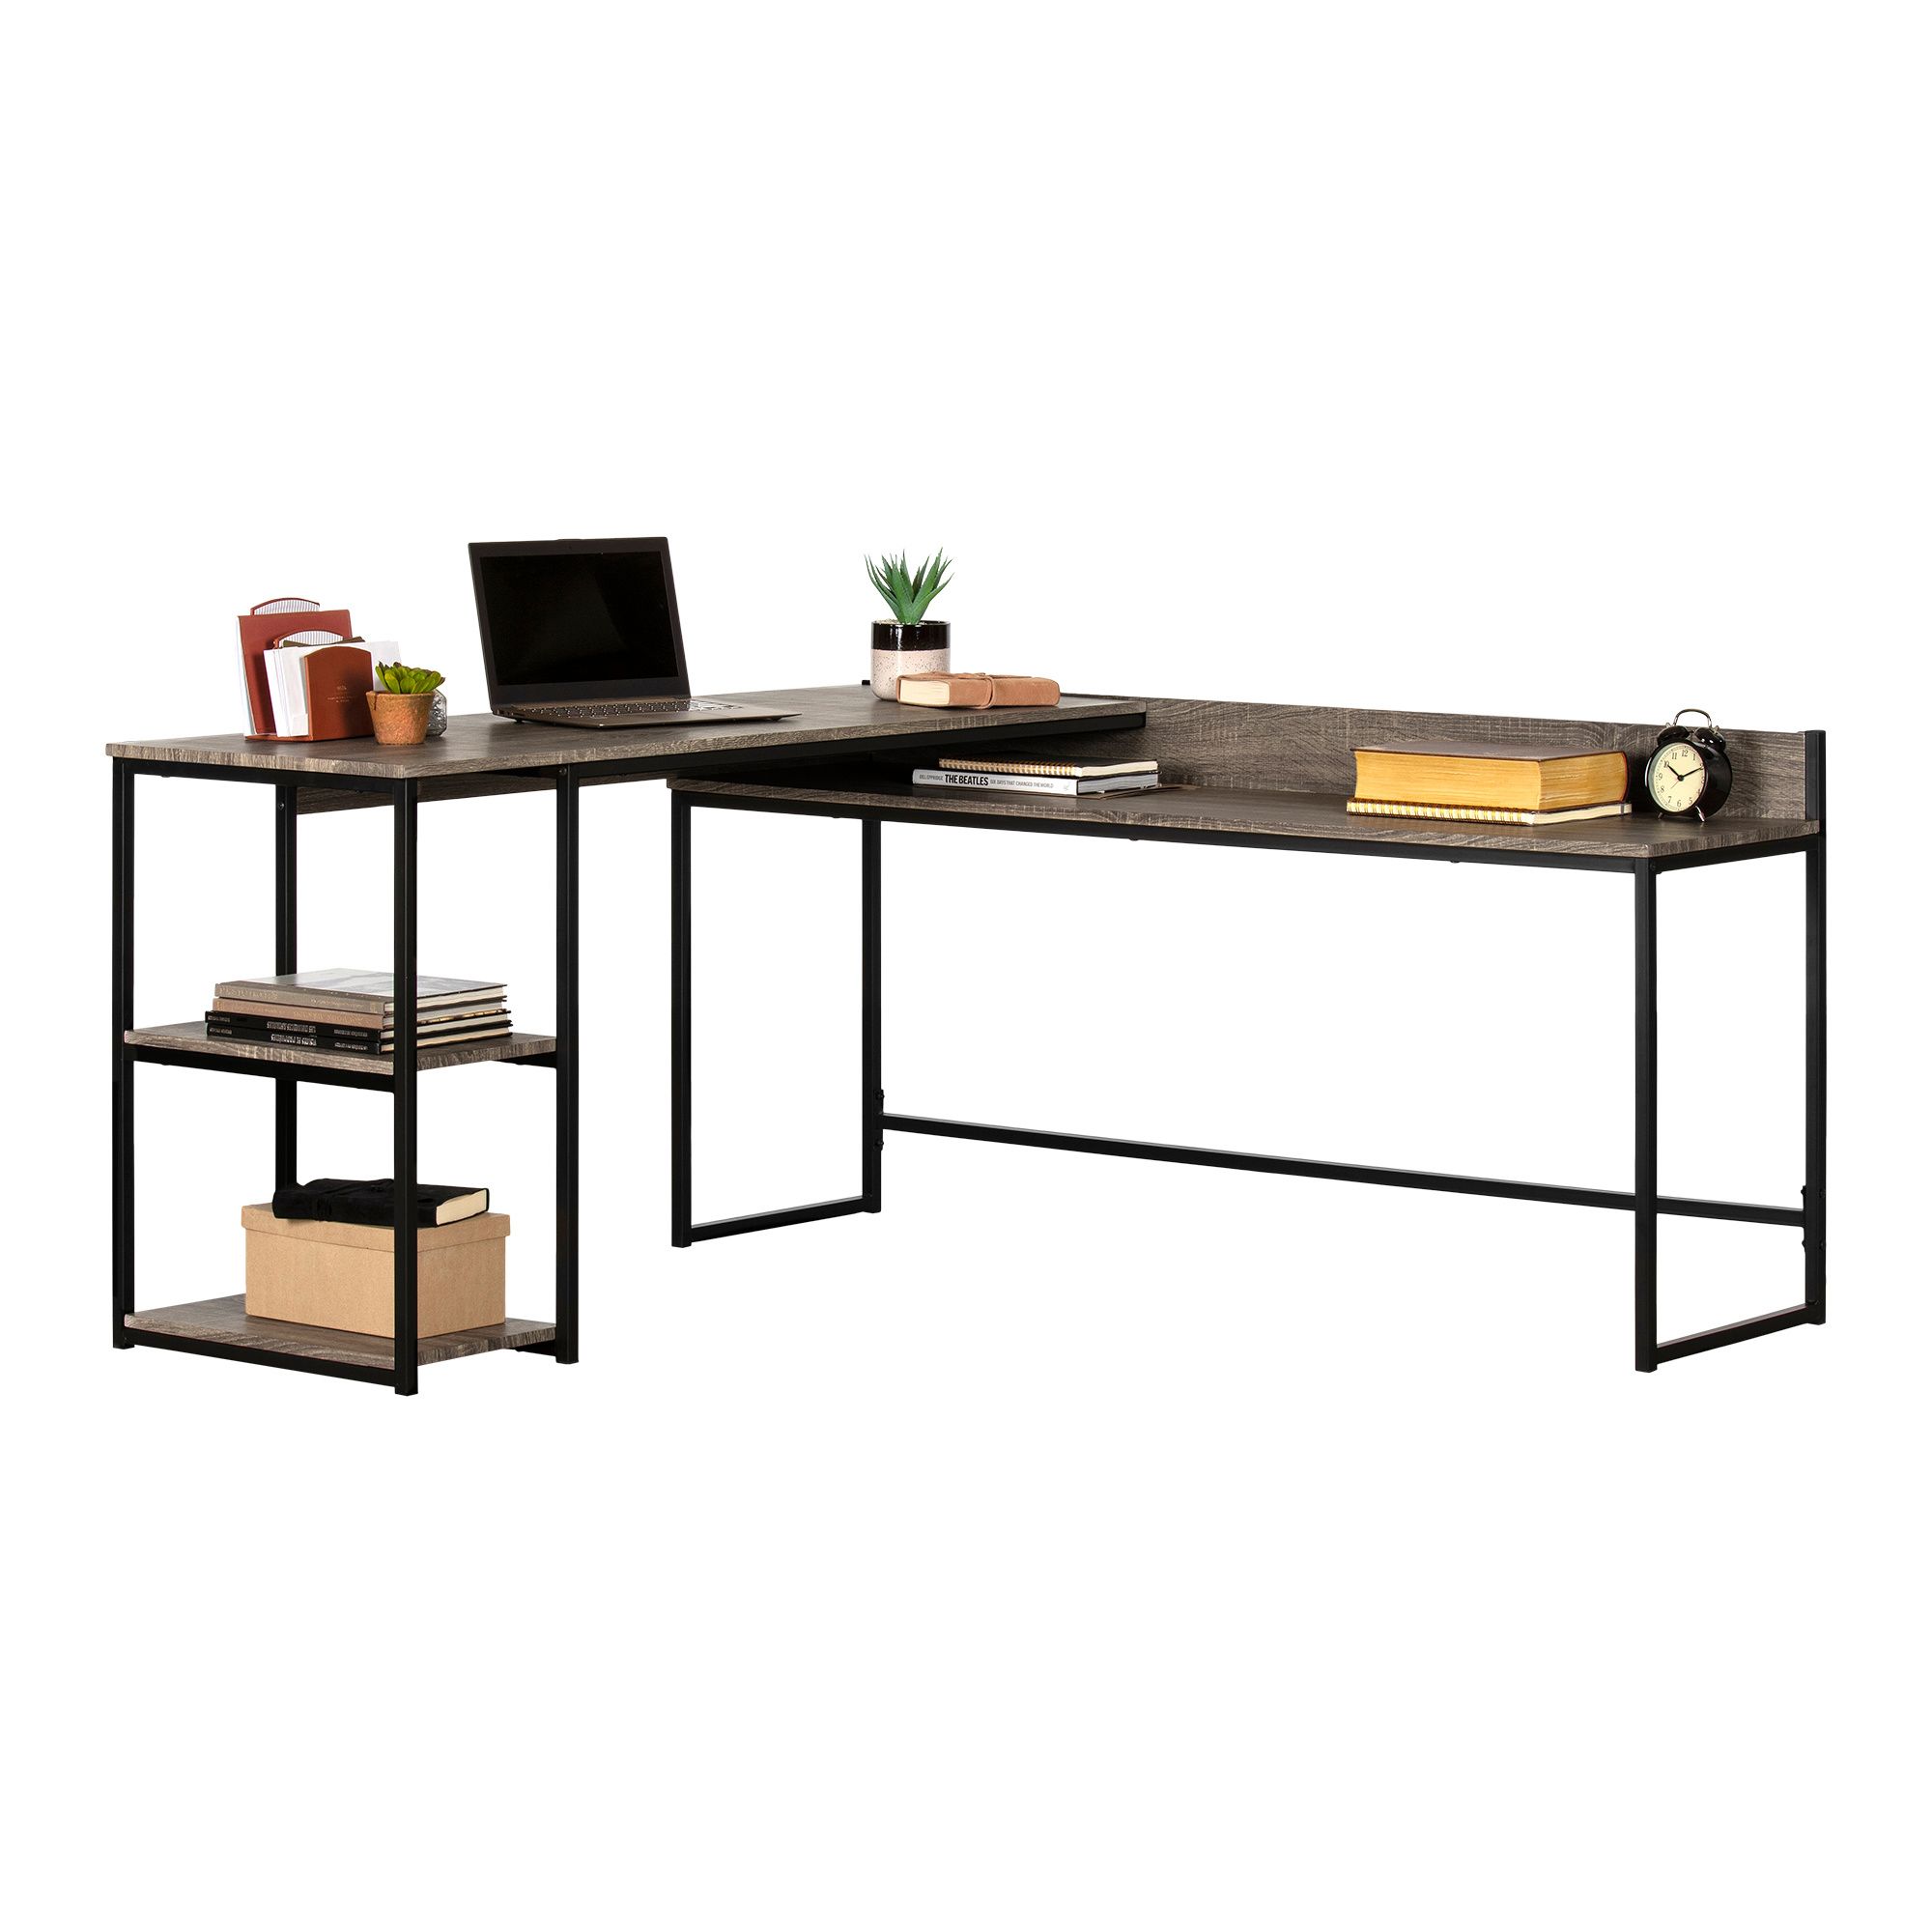 South Shore Evane L, Shaped Desk, Oak Camel – M2go Pertaining To South Shore Evane Tv Stands With Doors In Oak Camel (View 9 of 15)